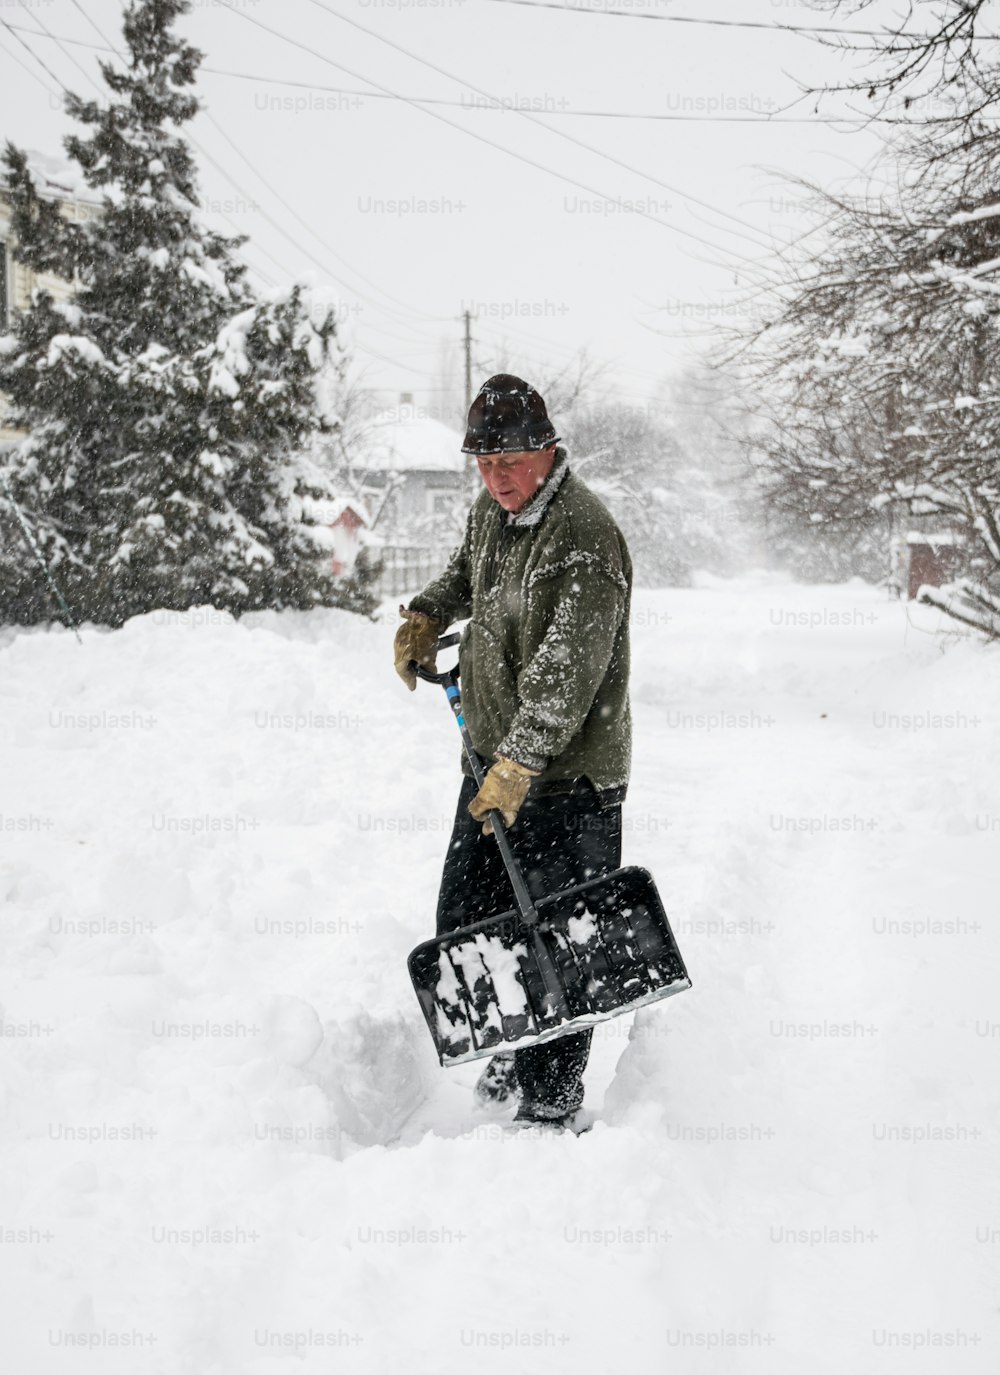 Winter snow removal. A man with a shovel clears the yard and driveway from snow during heavy snow